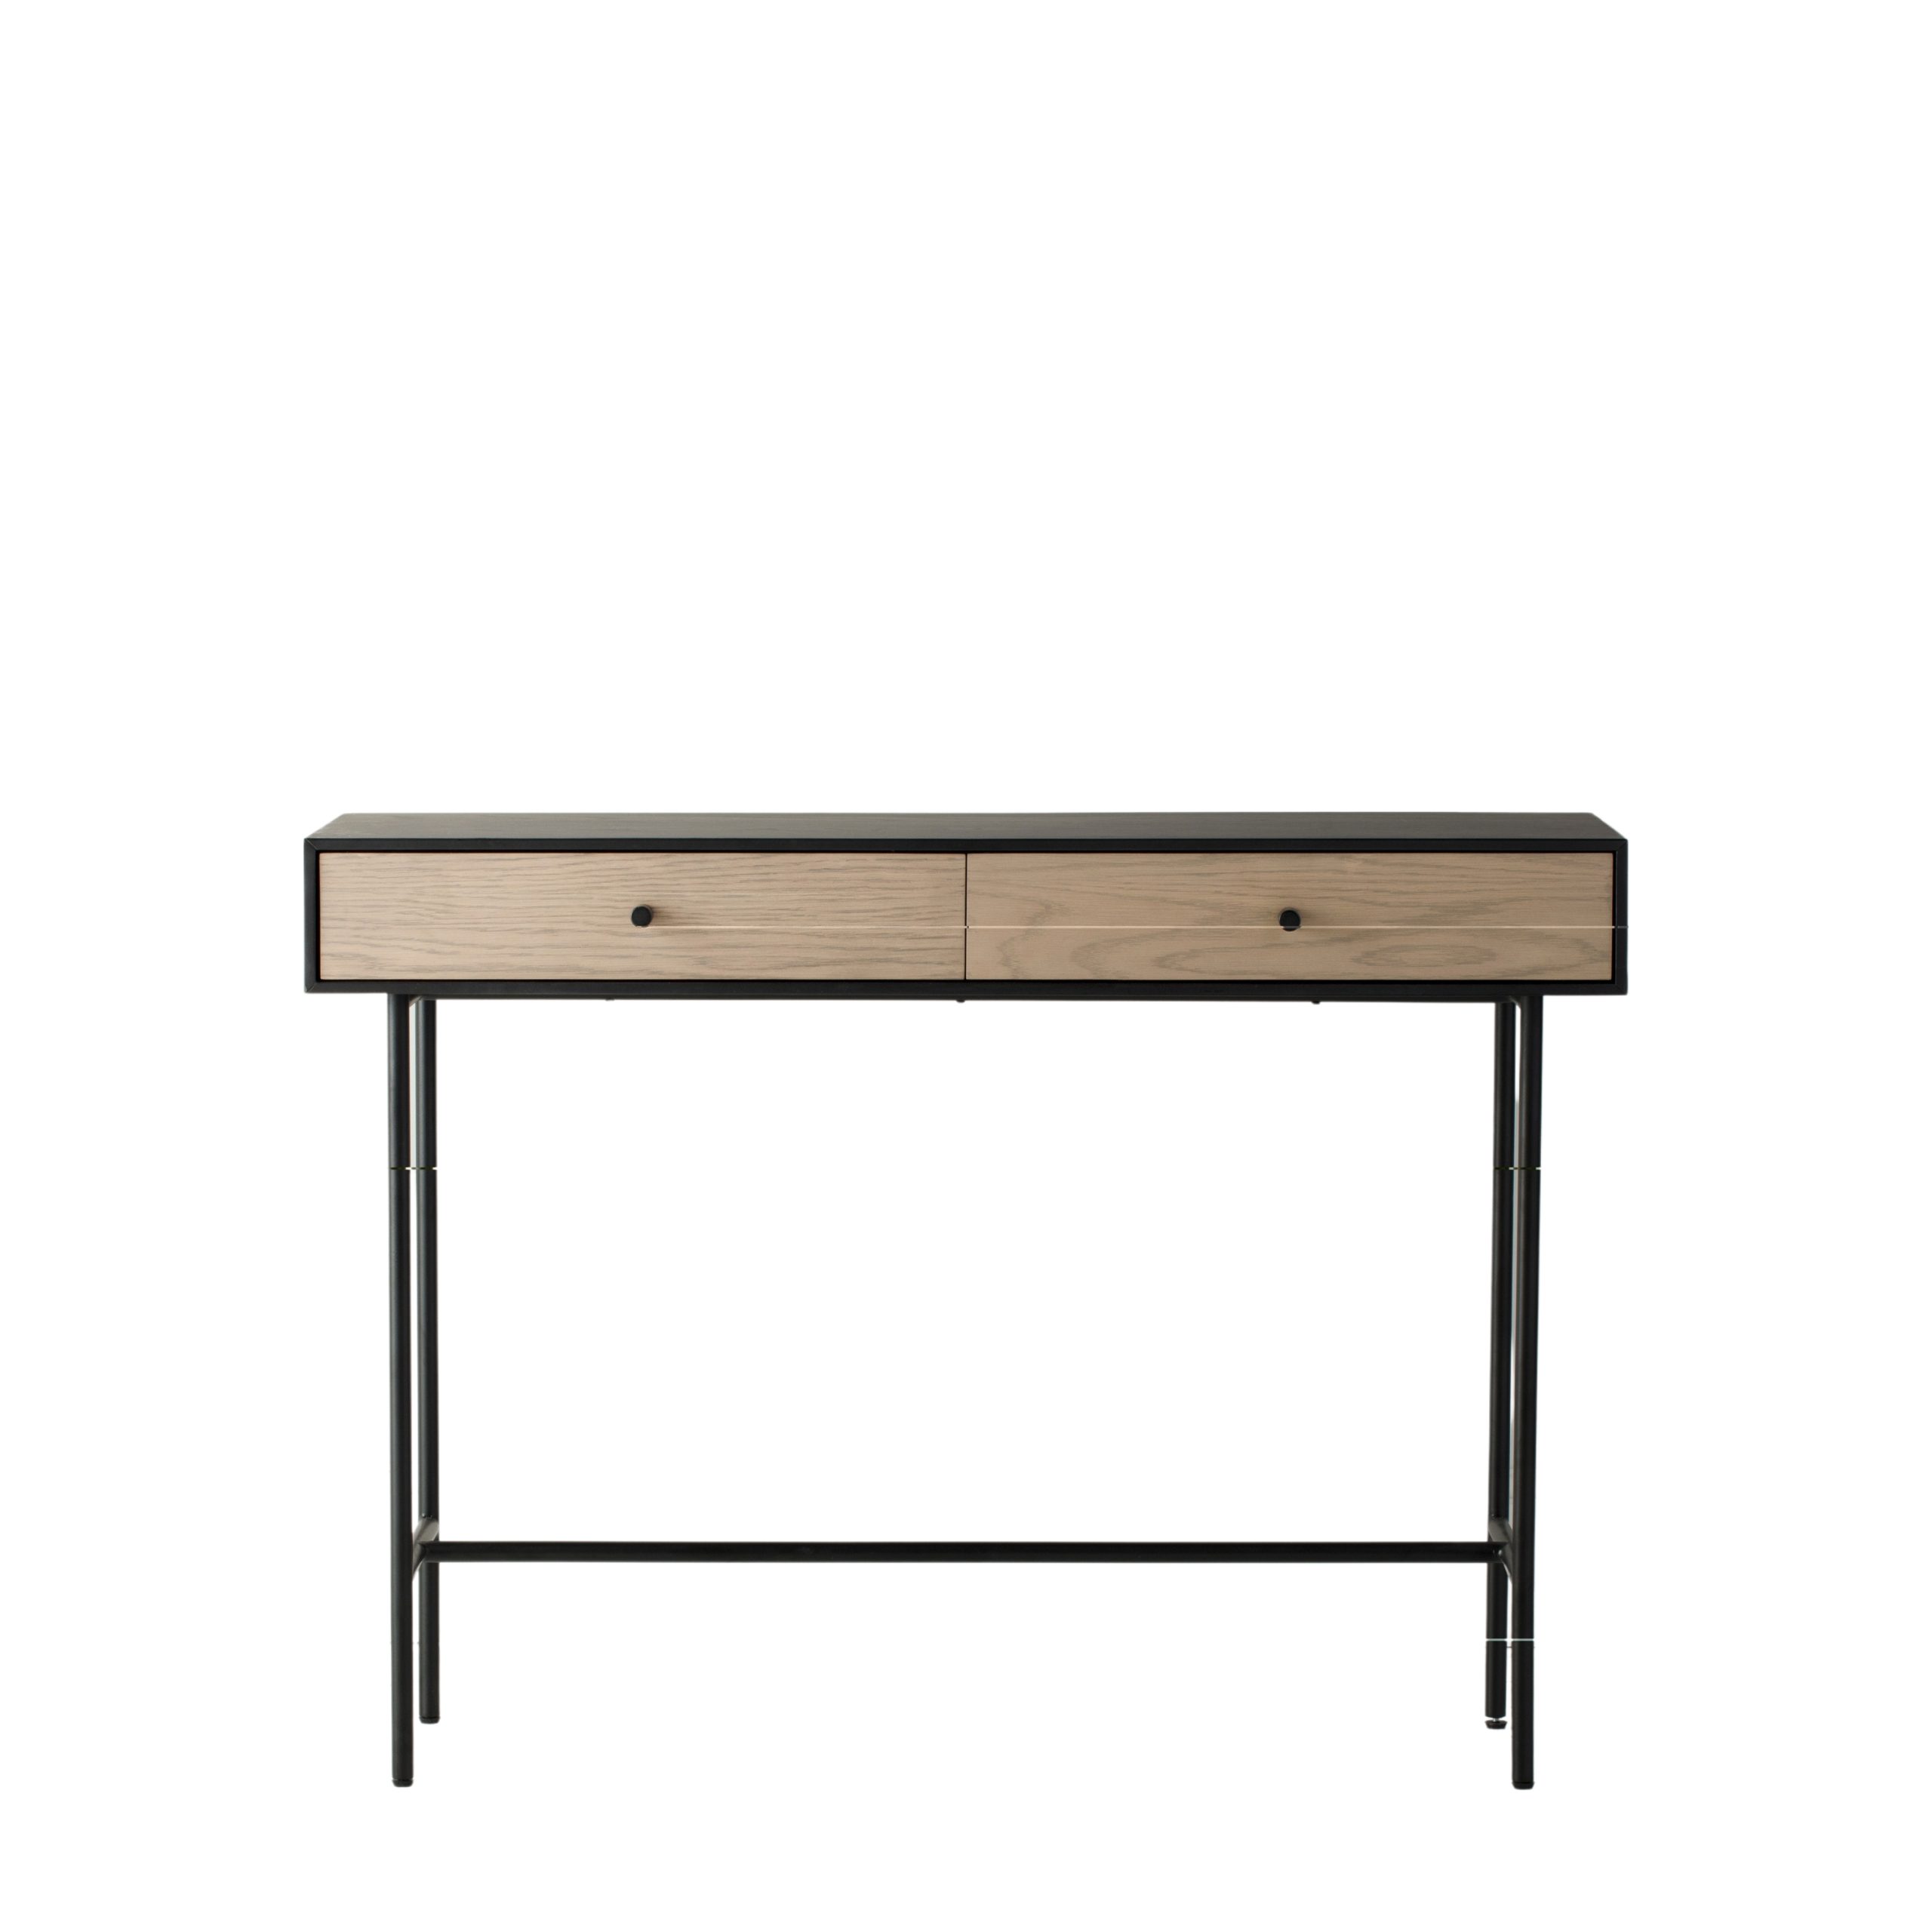 Gallery Direct Carbury 2 Drawer Console Table